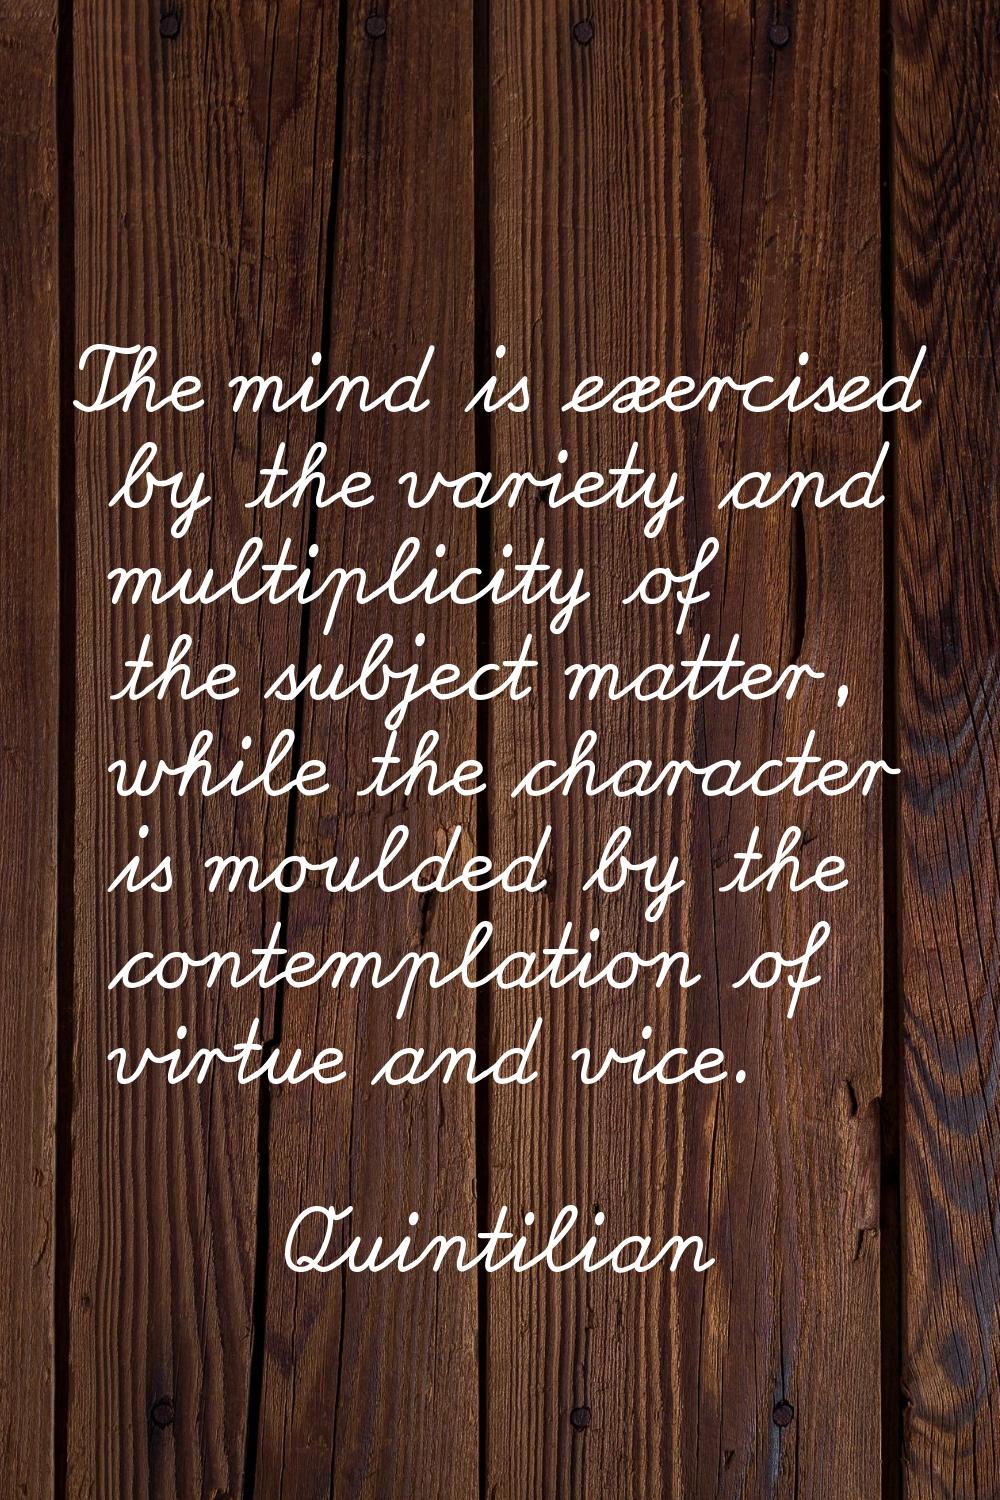 The mind is exercised by the variety and multiplicity of the subject matter, while the character is